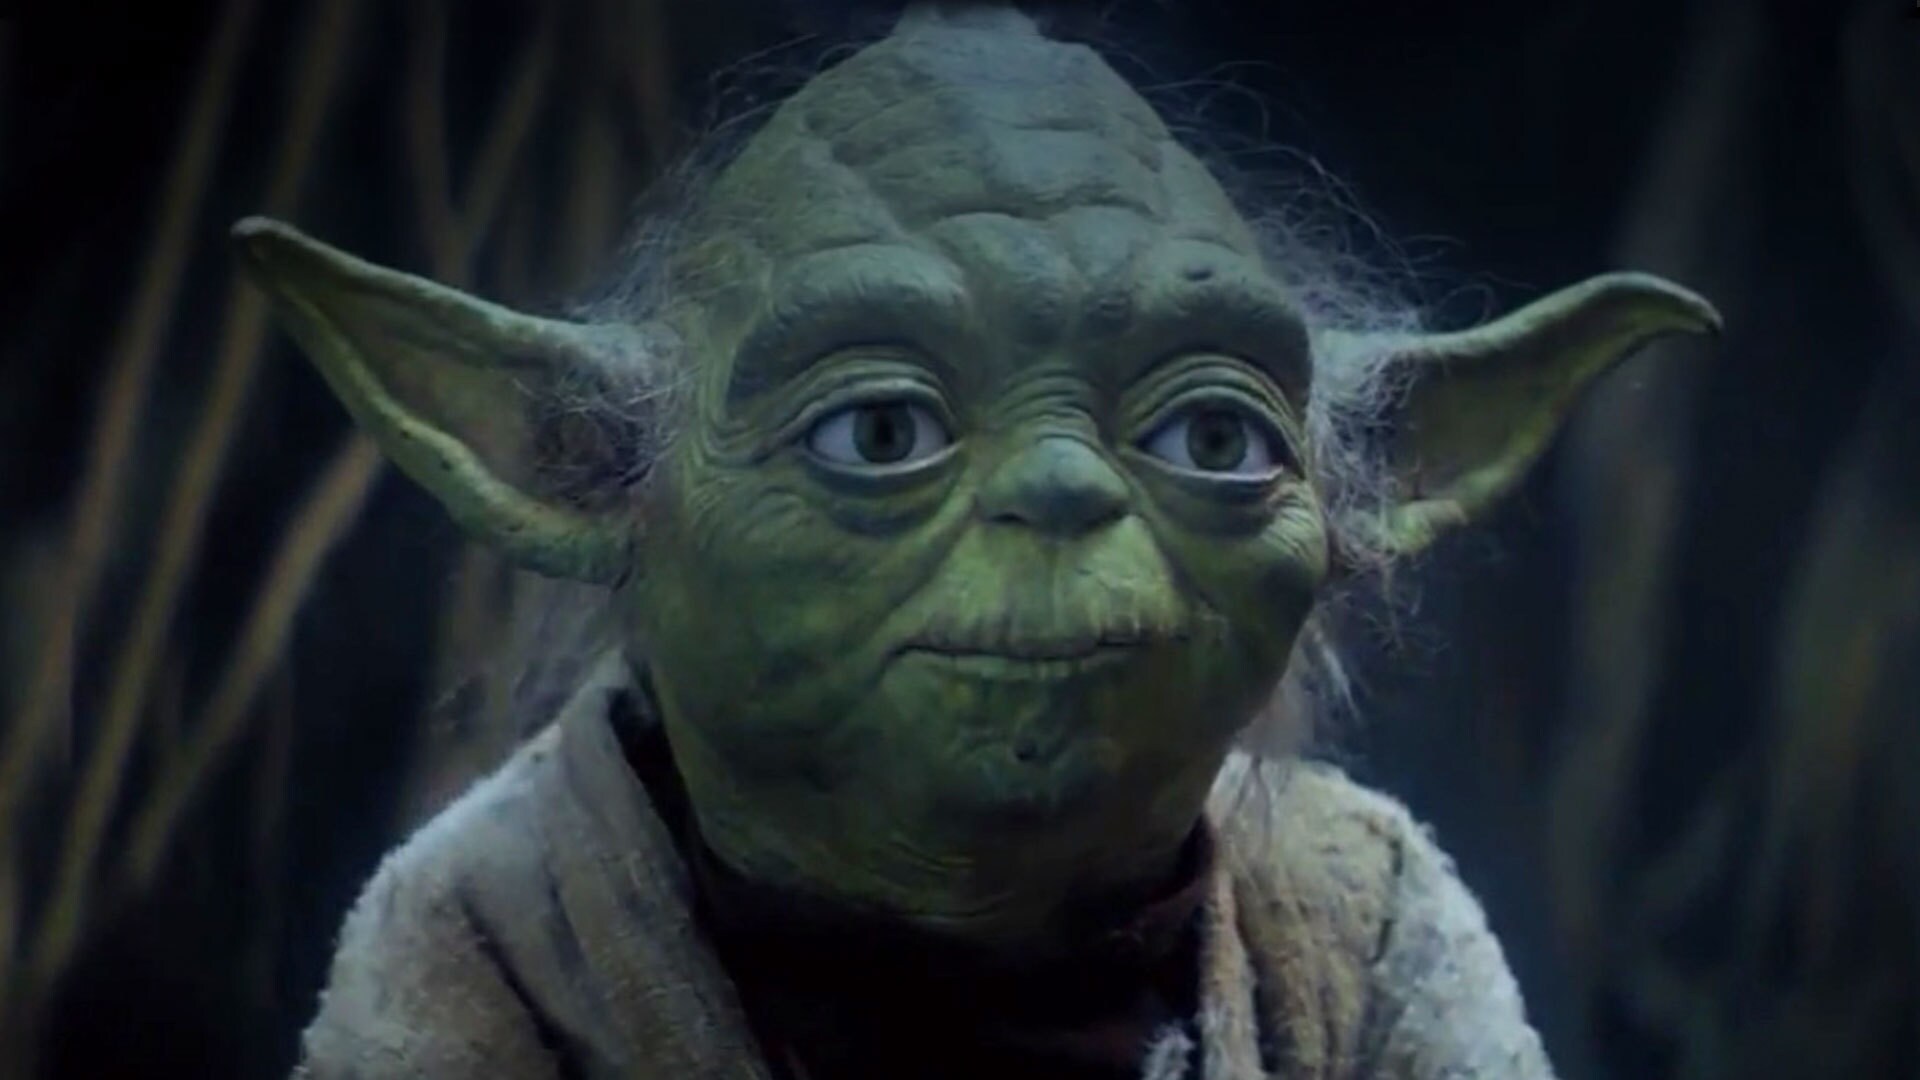 Best Yoda Quotes - The StarWars.com 10